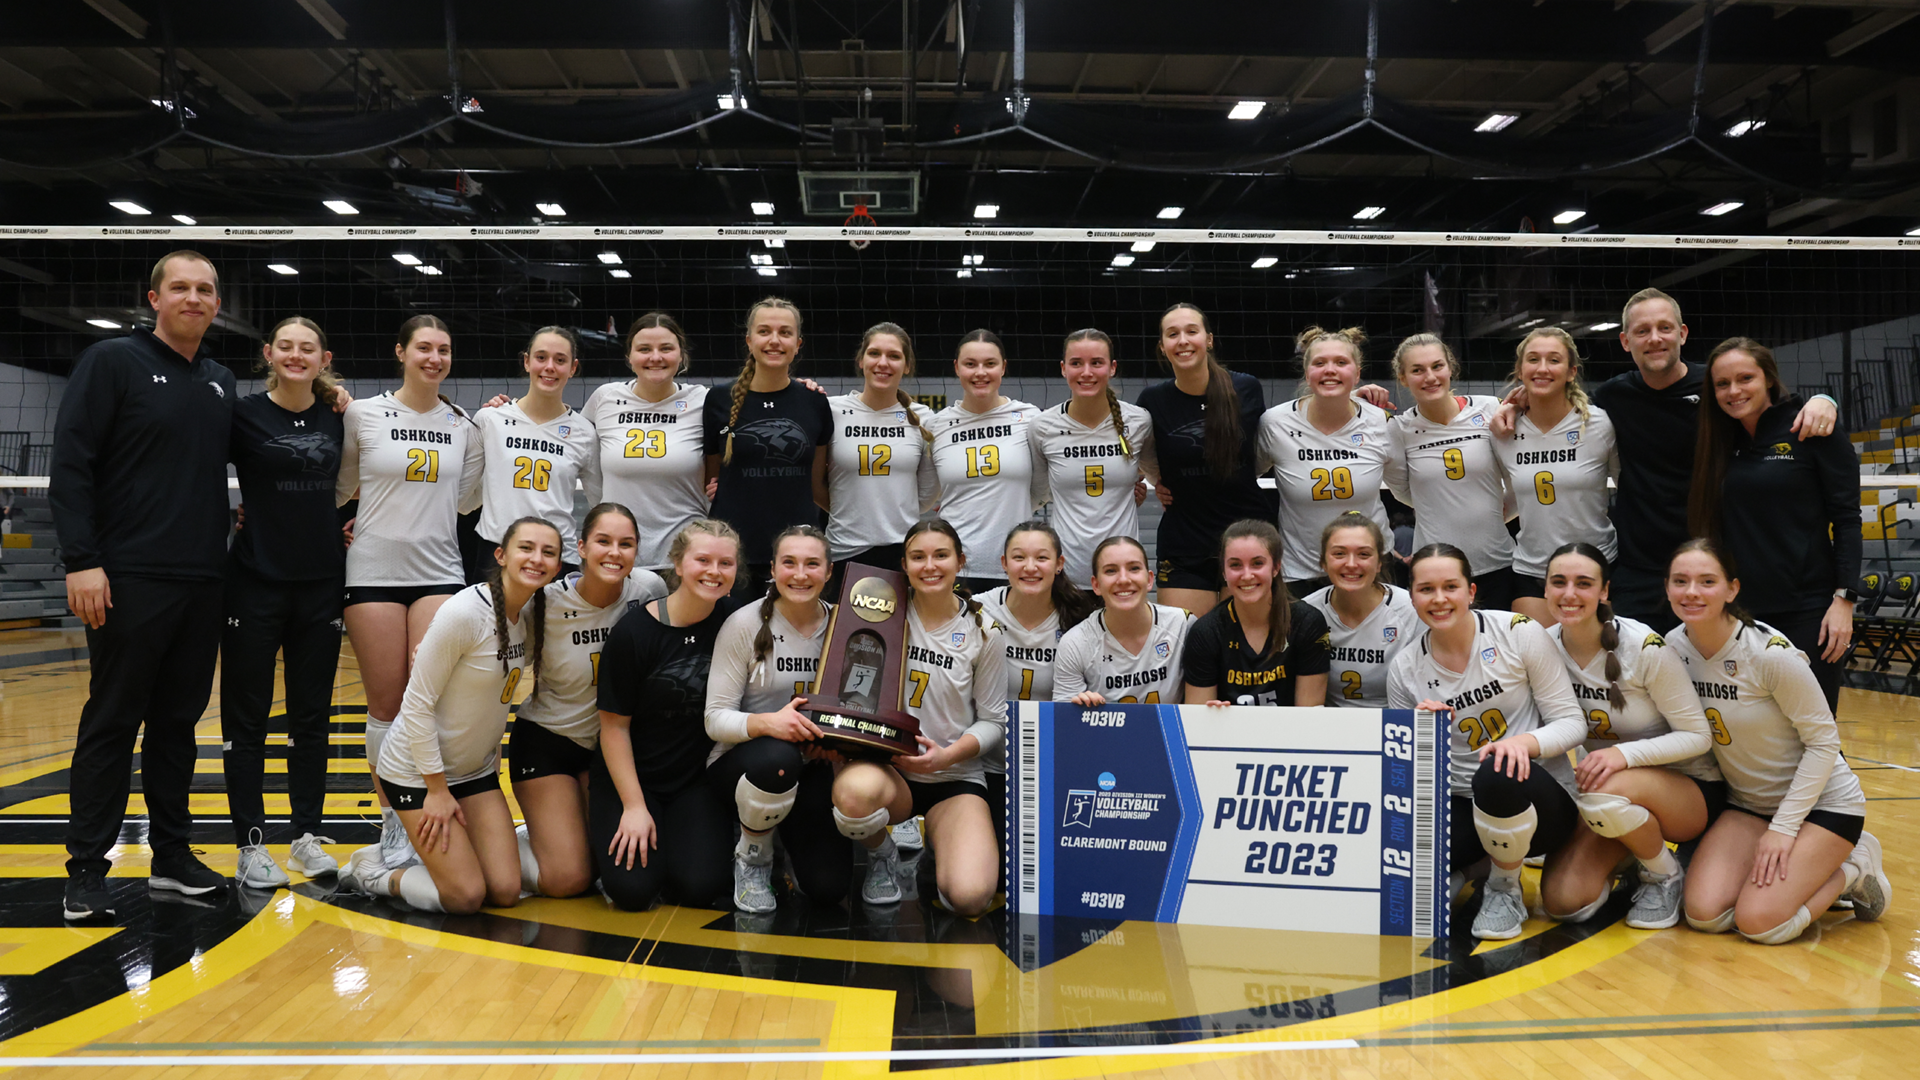 The UW-Oshkosh women's volleyball team is advancing to the NCAA quarterfinal for the first time since 2009